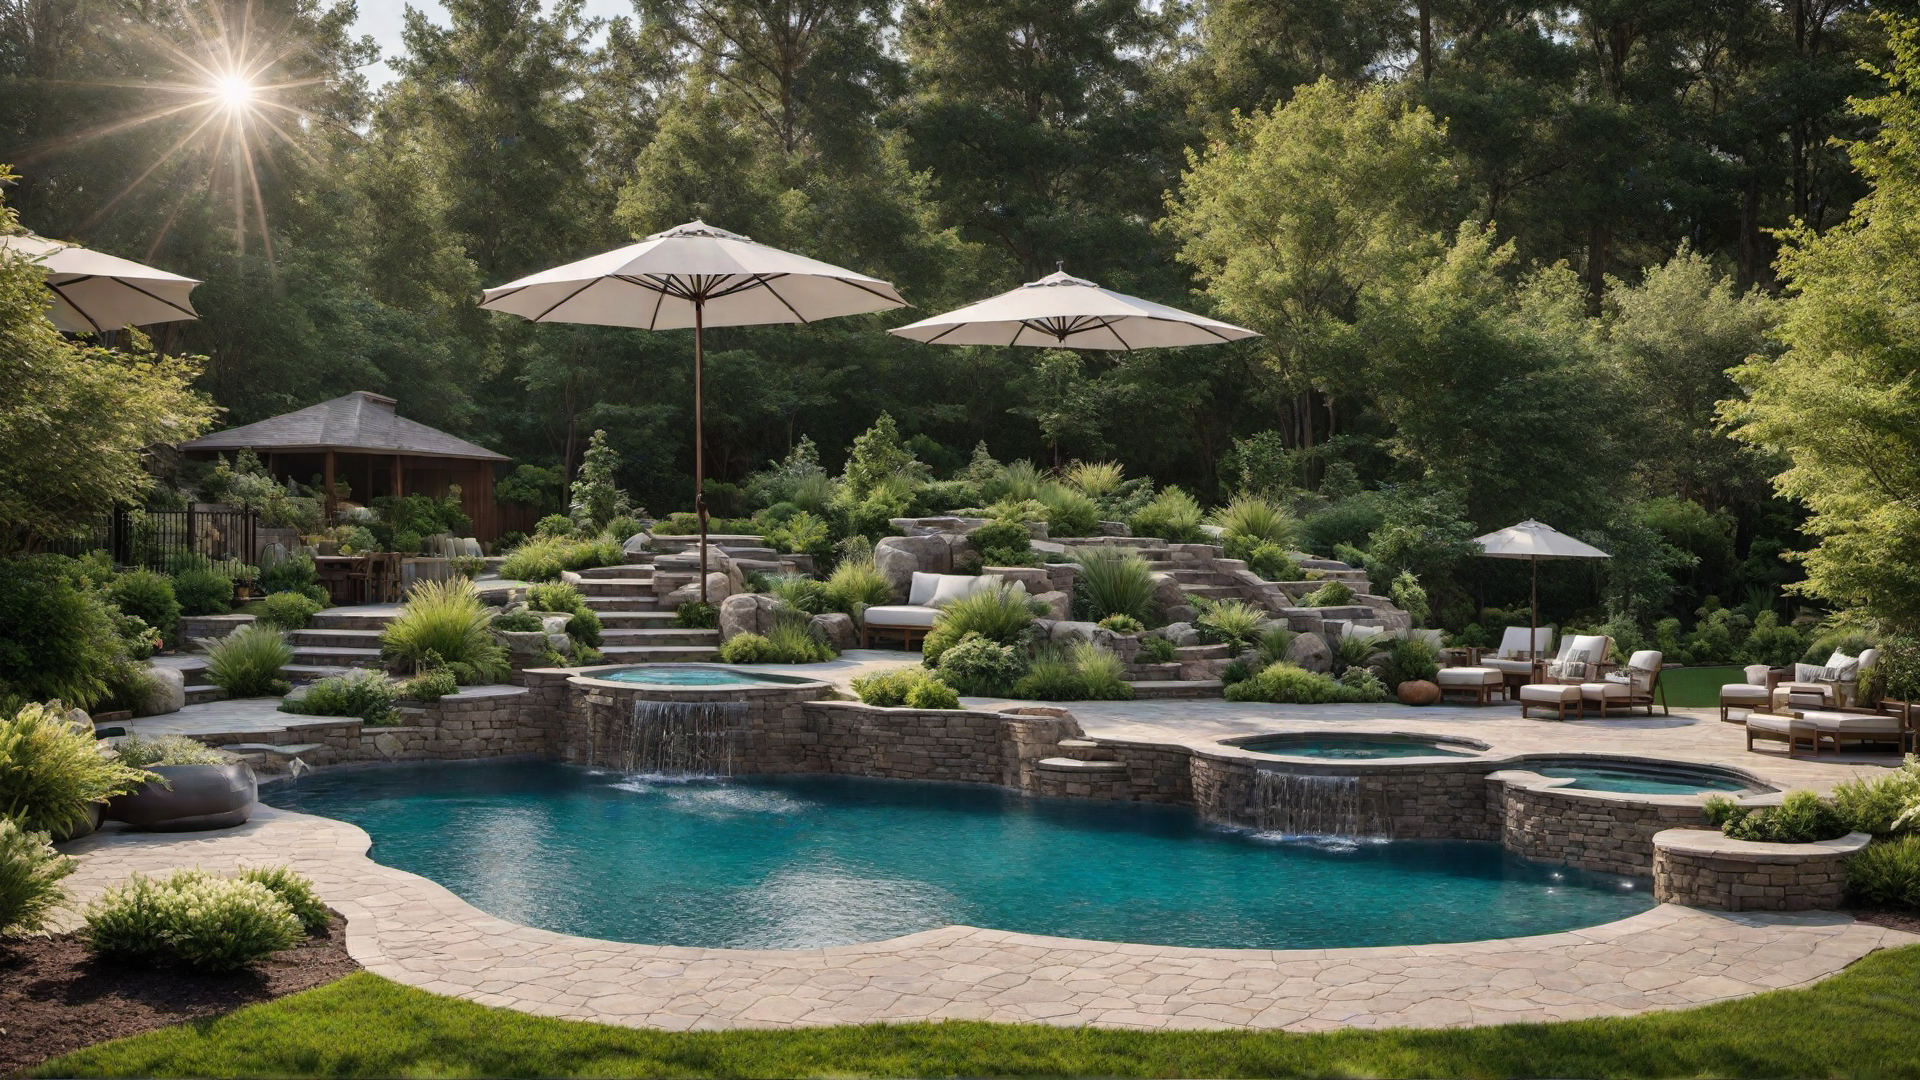 Freeform Pool with Curved Edges and Natural Landscaping